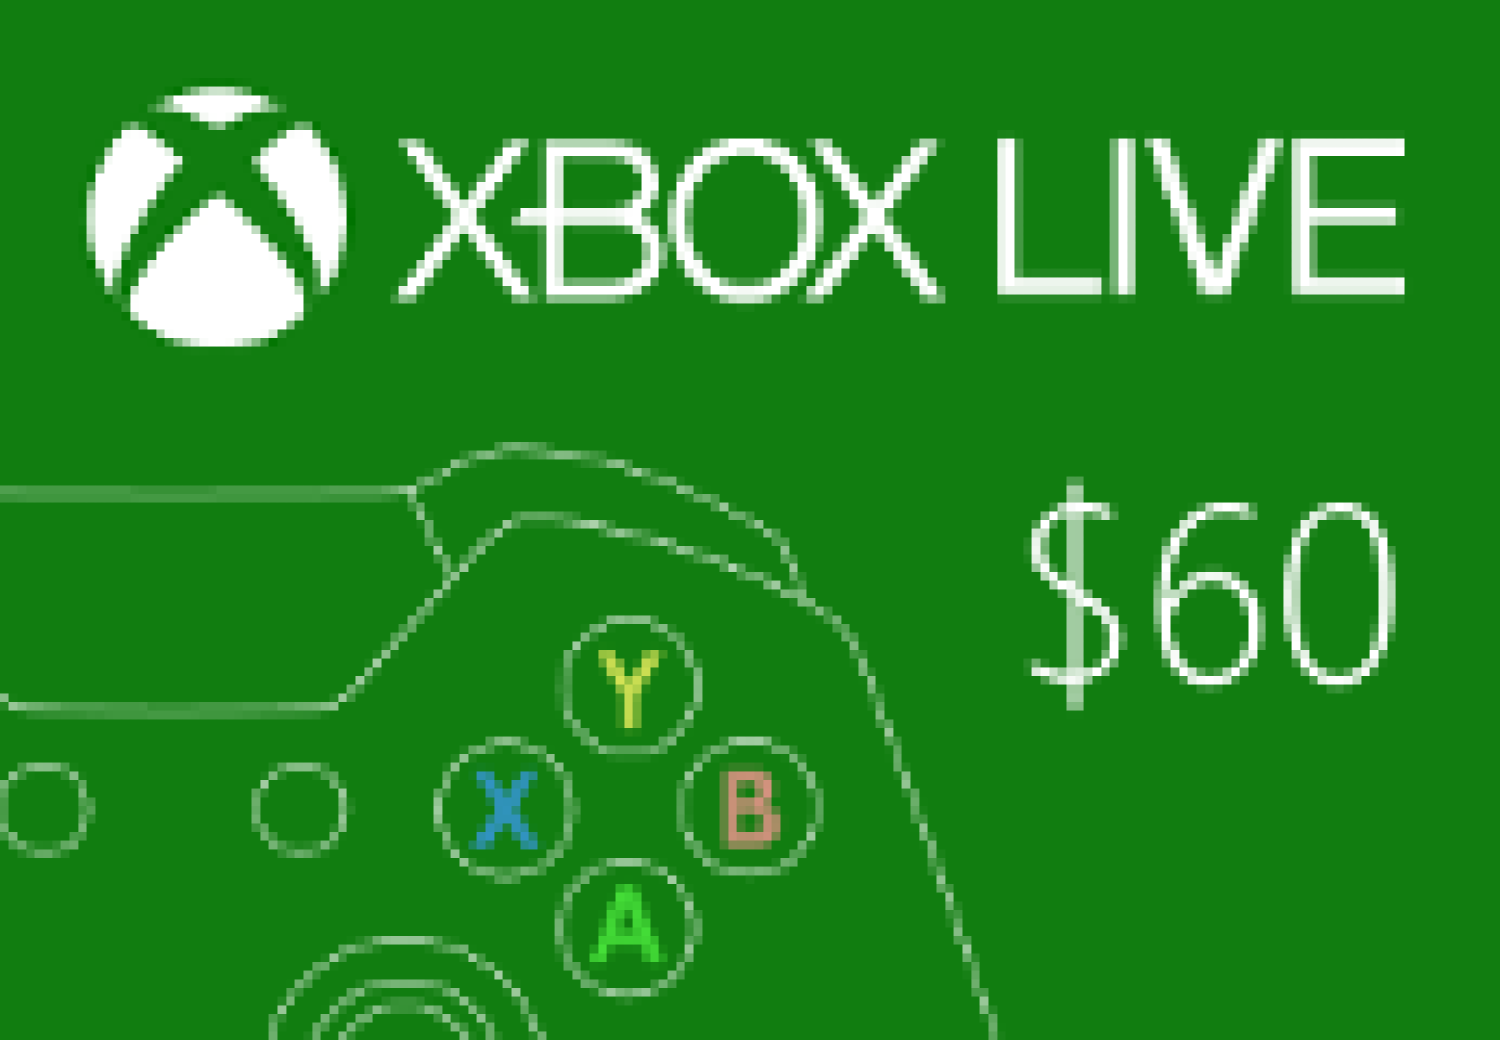 $60 Xbox Gift Card (Digital Delivery) $45